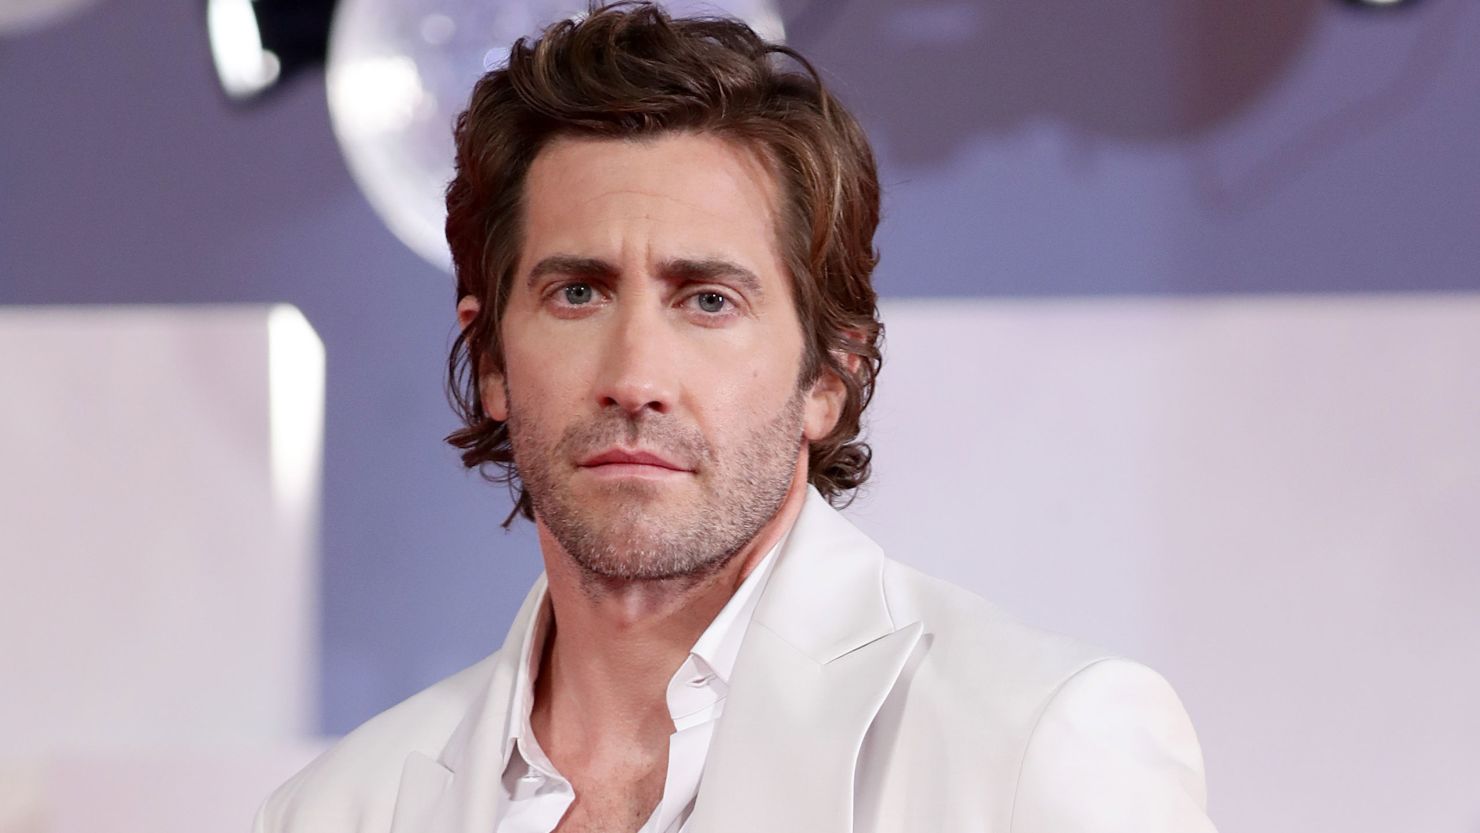 Jake Gyllenhaal, seen here at the premiere of "The Lost Daughter" during the 78th Venice International Film Festival on September 03, 2021 in Venice, Italy, is set to lead the cast in a "Road House" remake. 